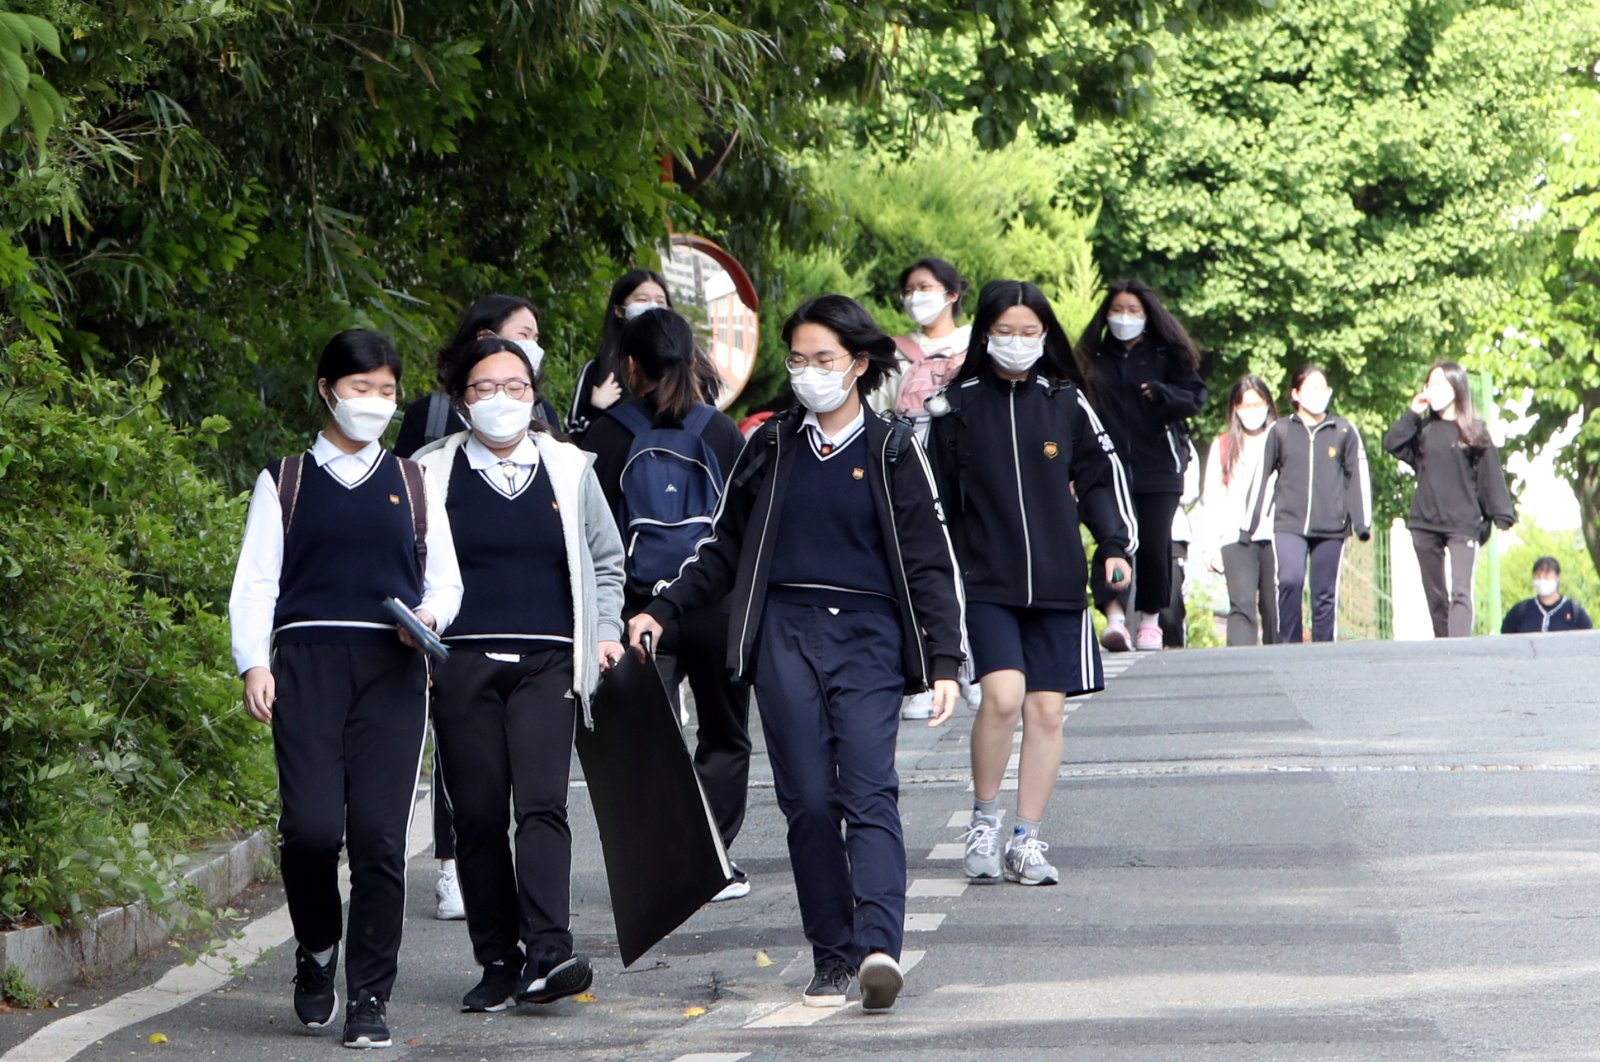 High school students wearing protective masks walk after finishing their classes, as schools reopen following the global outbreak of COVID-19, Gwangju, South Korea, May 20, 2020. (Yonhap via Reuters Photo)